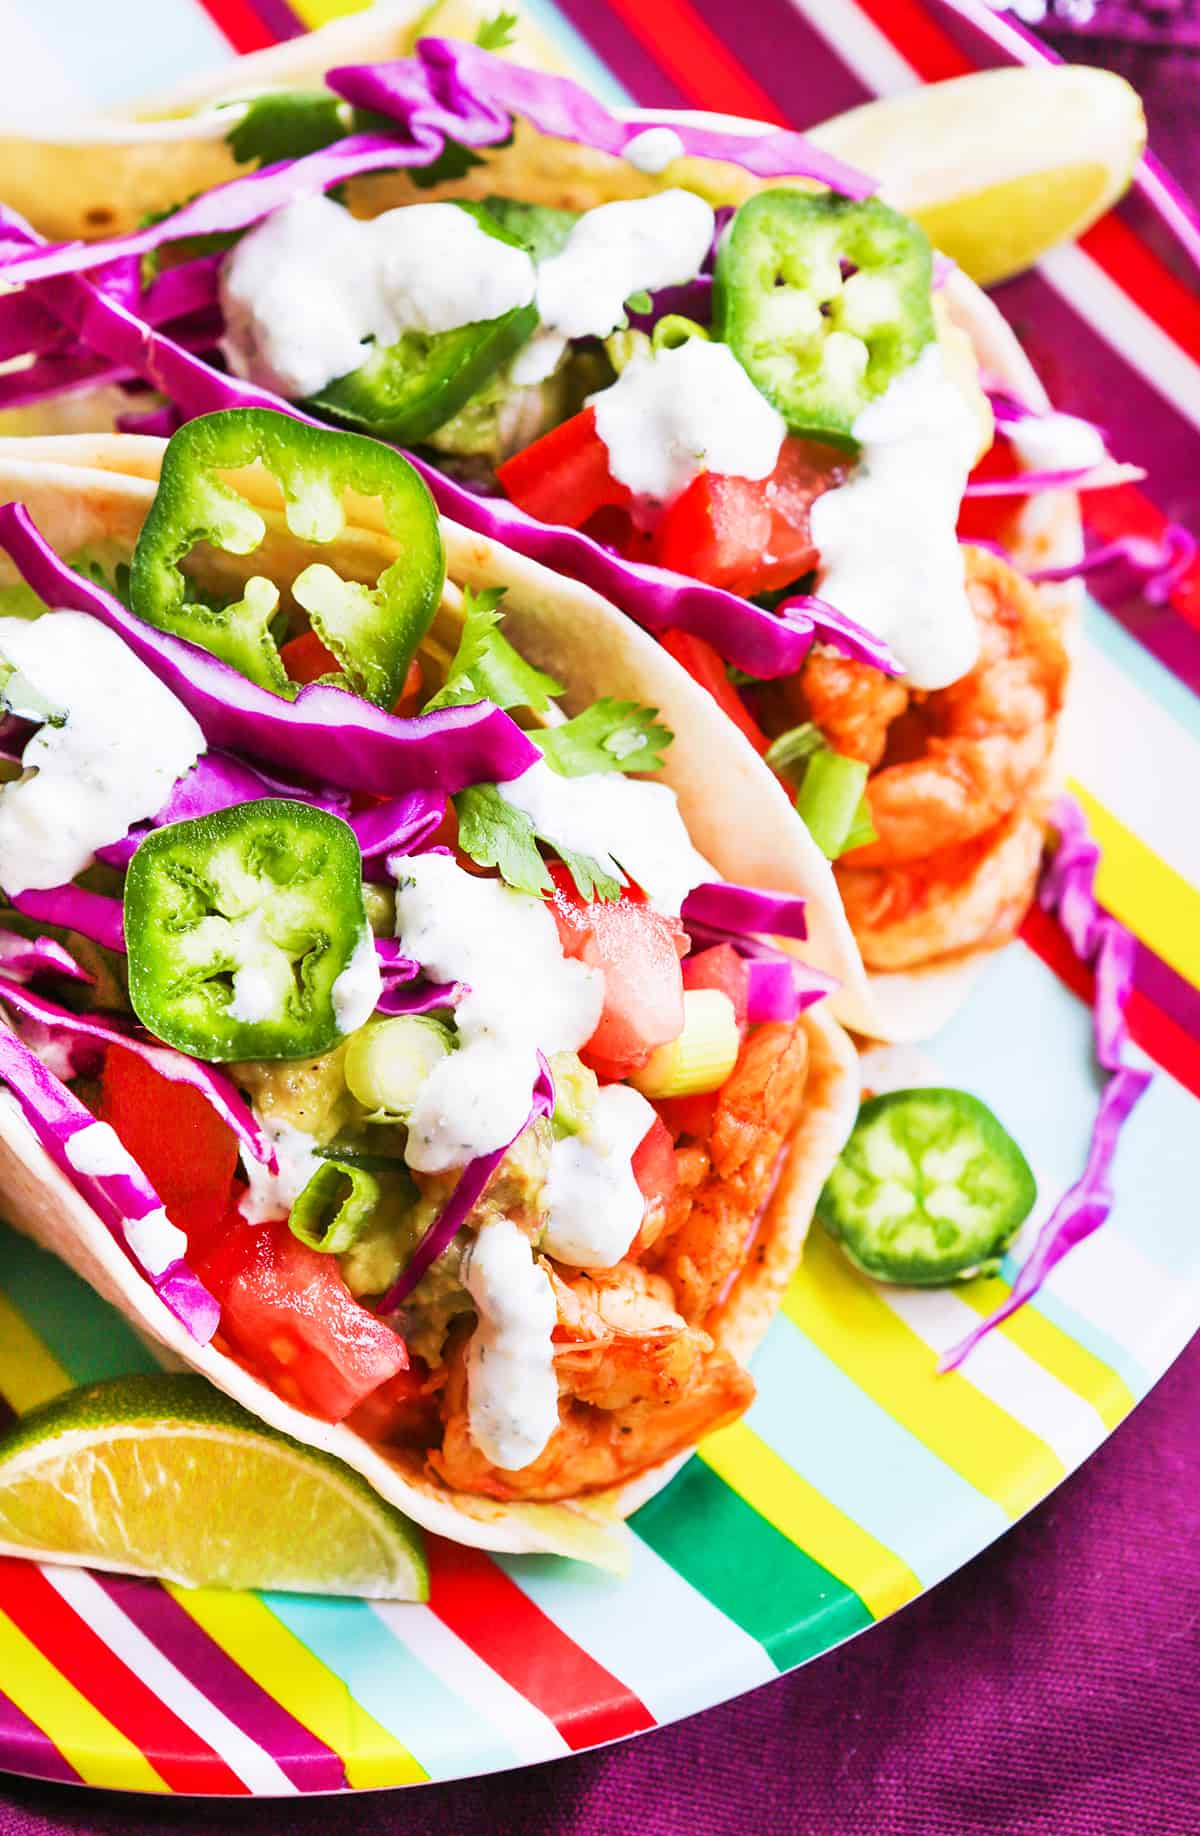 Two shrimp tacos on a colorful plate, topped with cabbage, jalapeno slices and sauce.